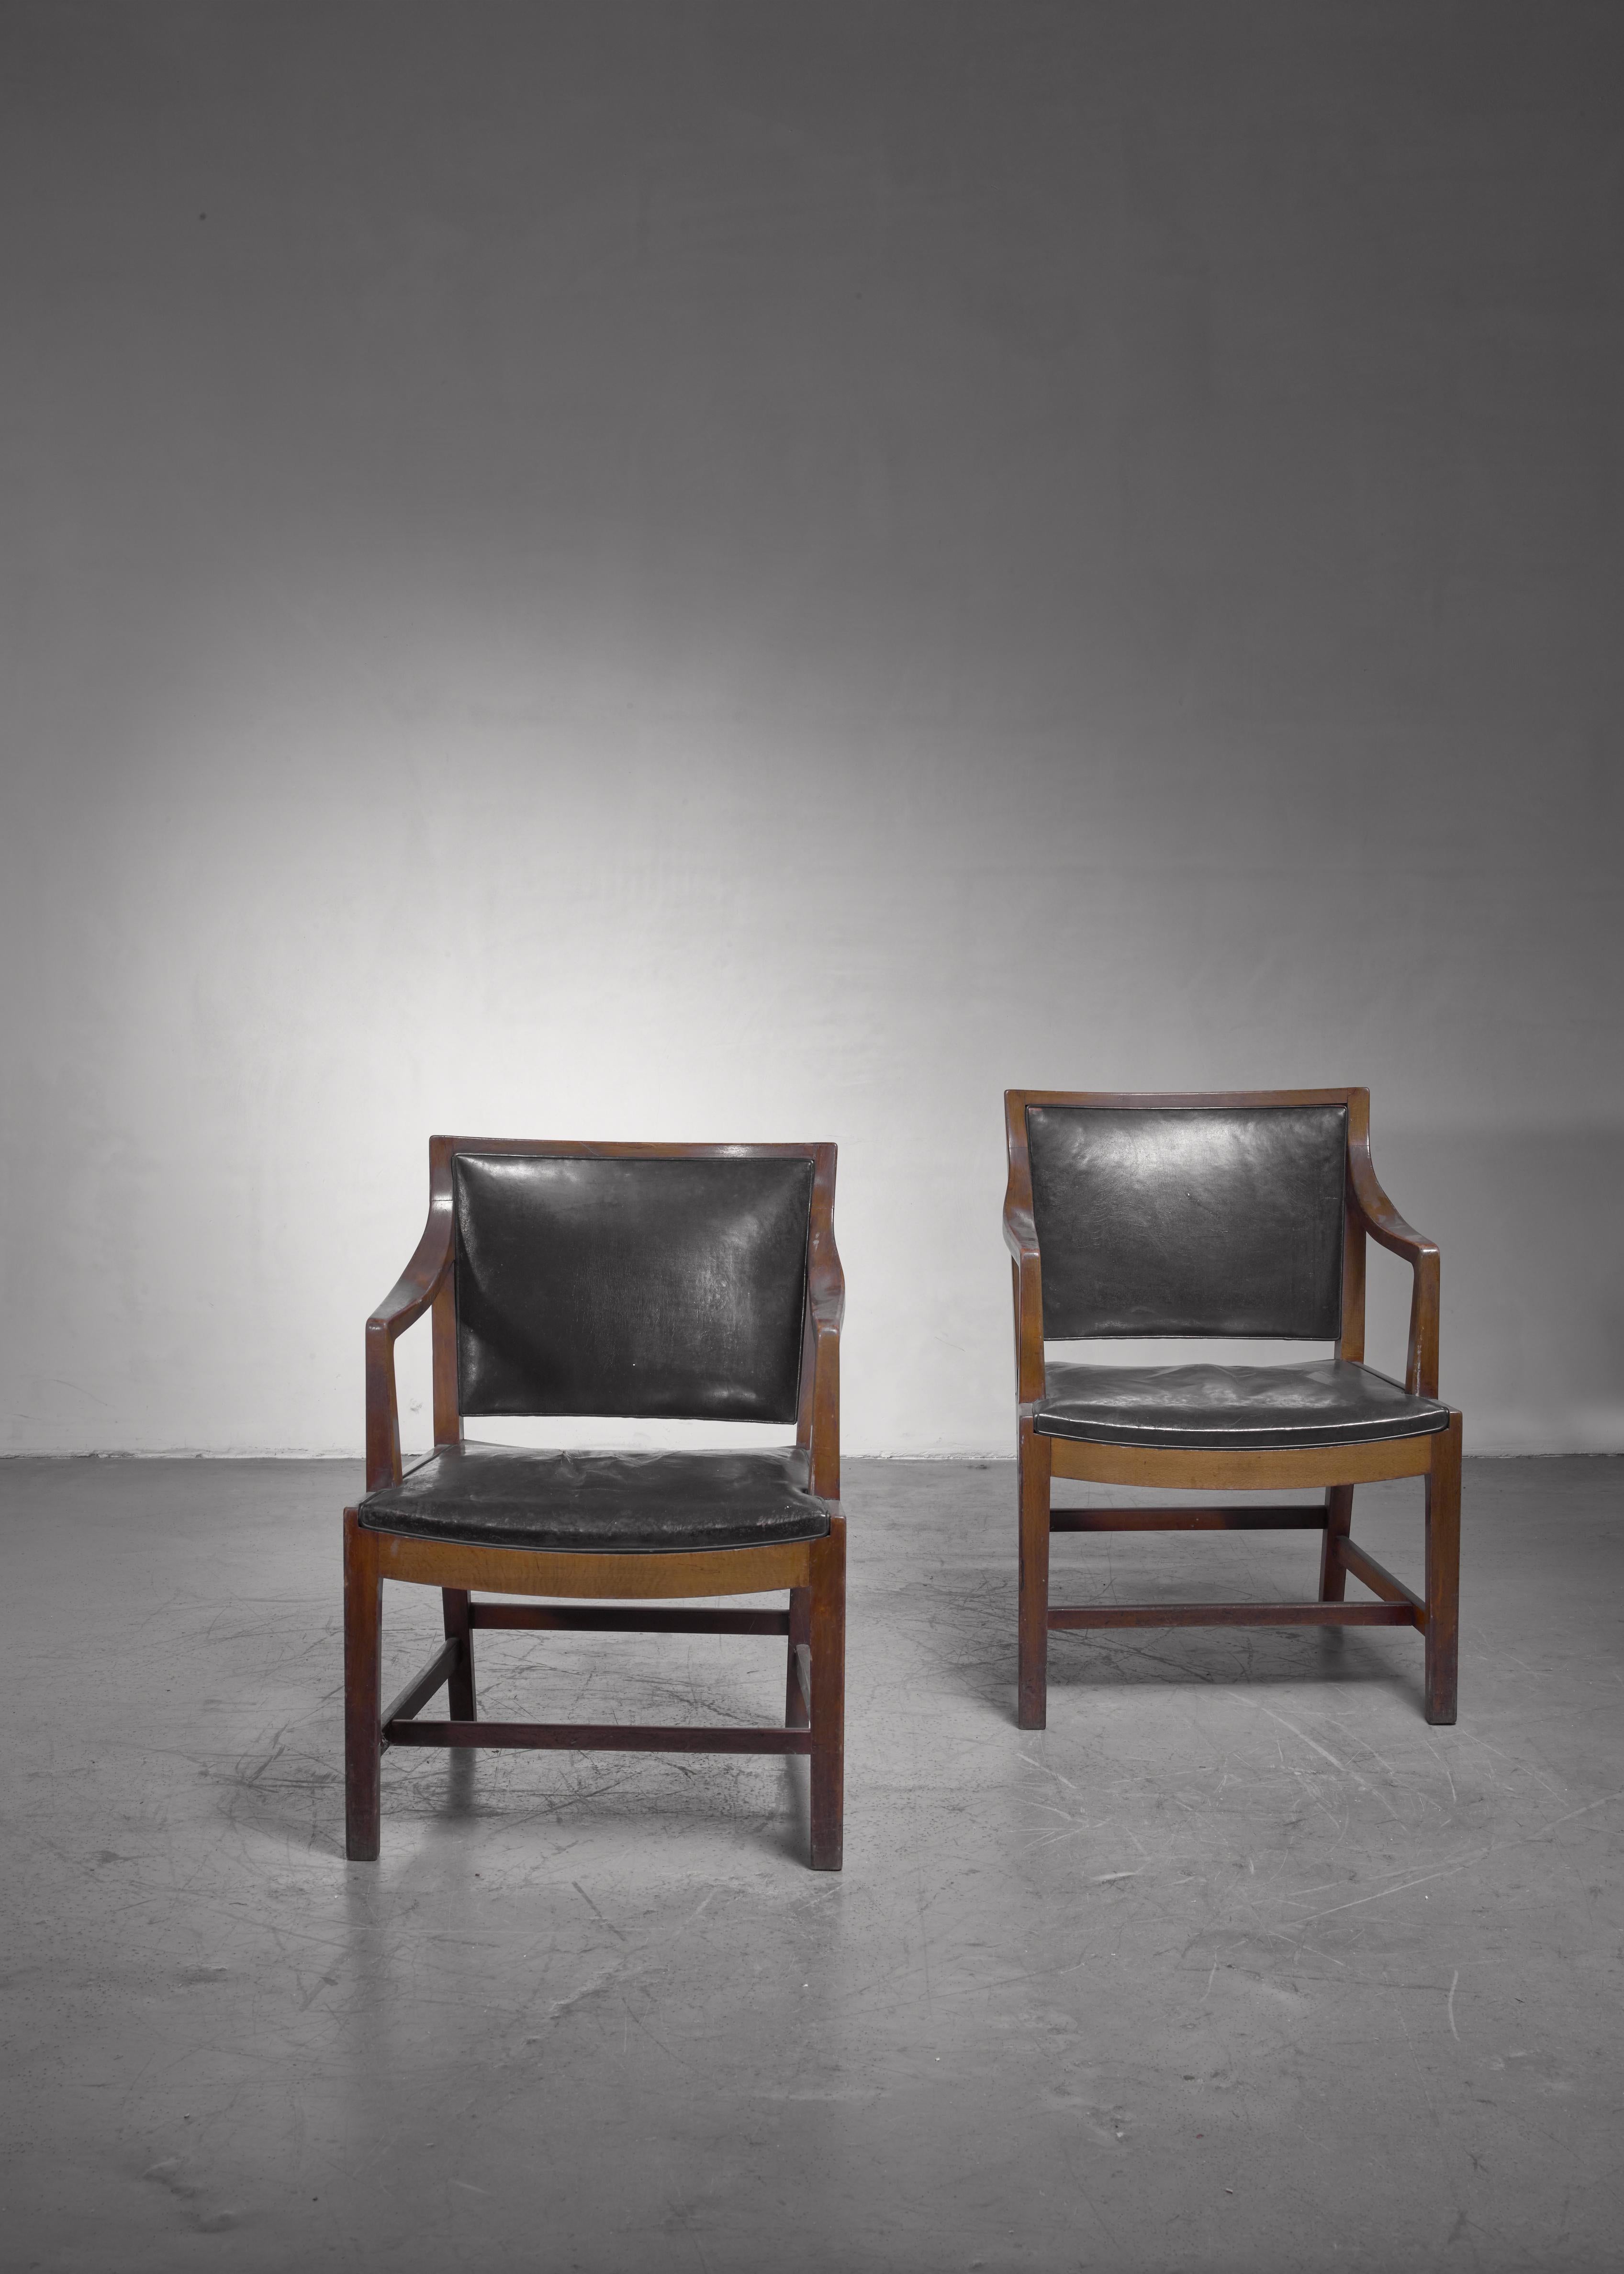 A rare pair of armchairs made of stained beech, upholstered with a dark green leather. These chairs were designed for and used on the Kronprins Frederik ferry (built 1941), which was furnished by Fisker. The model was later also used on the Kong